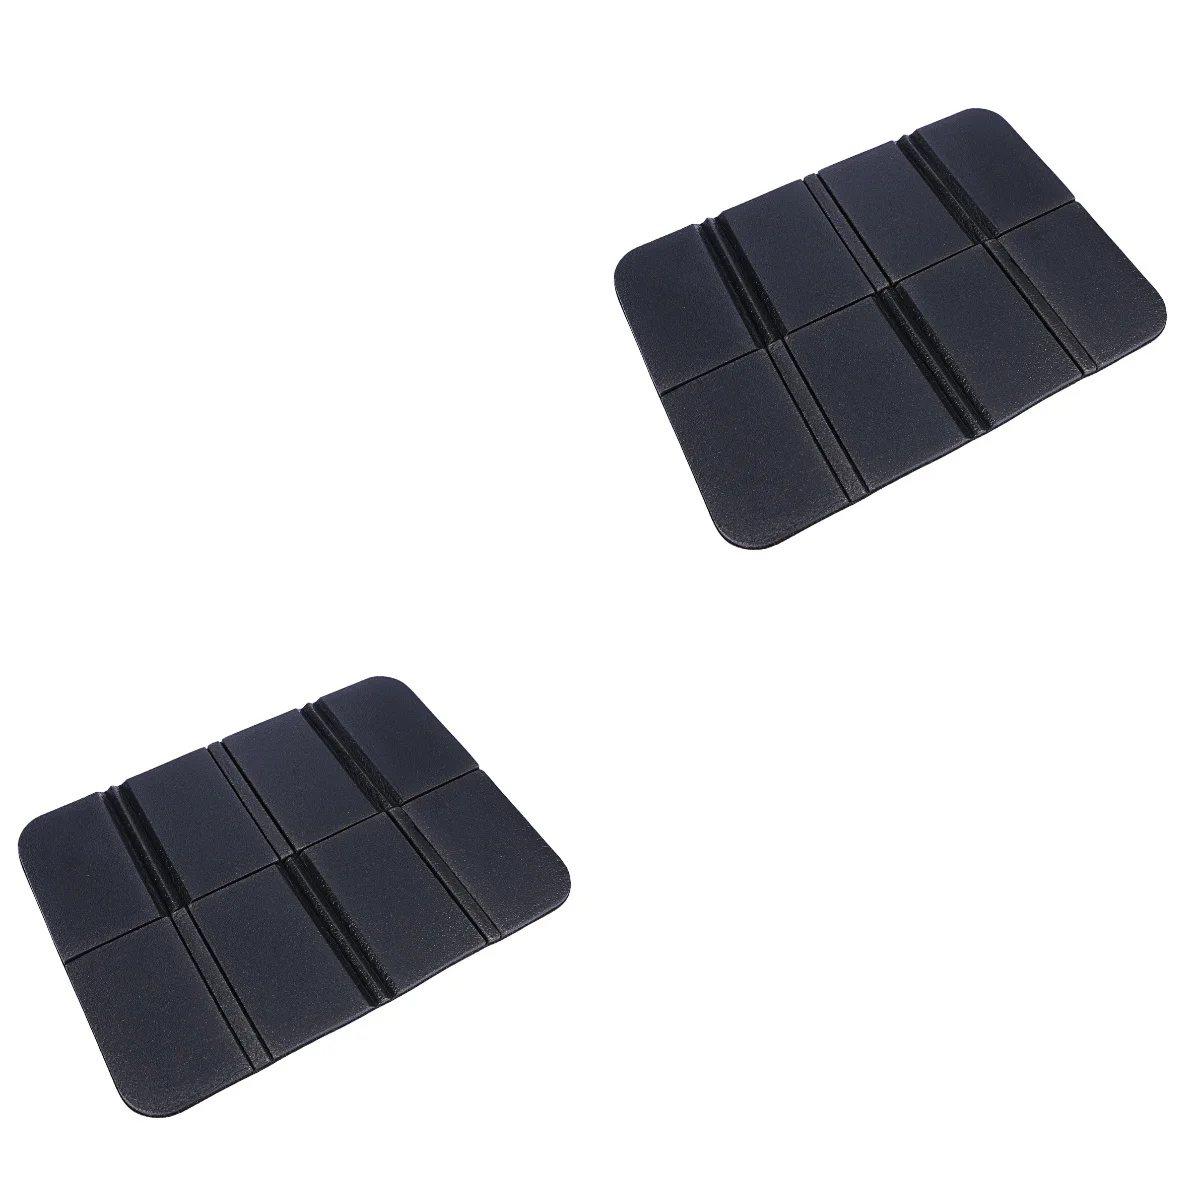 

2pcs Moisture-proof Folding XPE Pads Waterproof Sitting Mat Cushion for Outdoor Camping Park Picnic (Black)